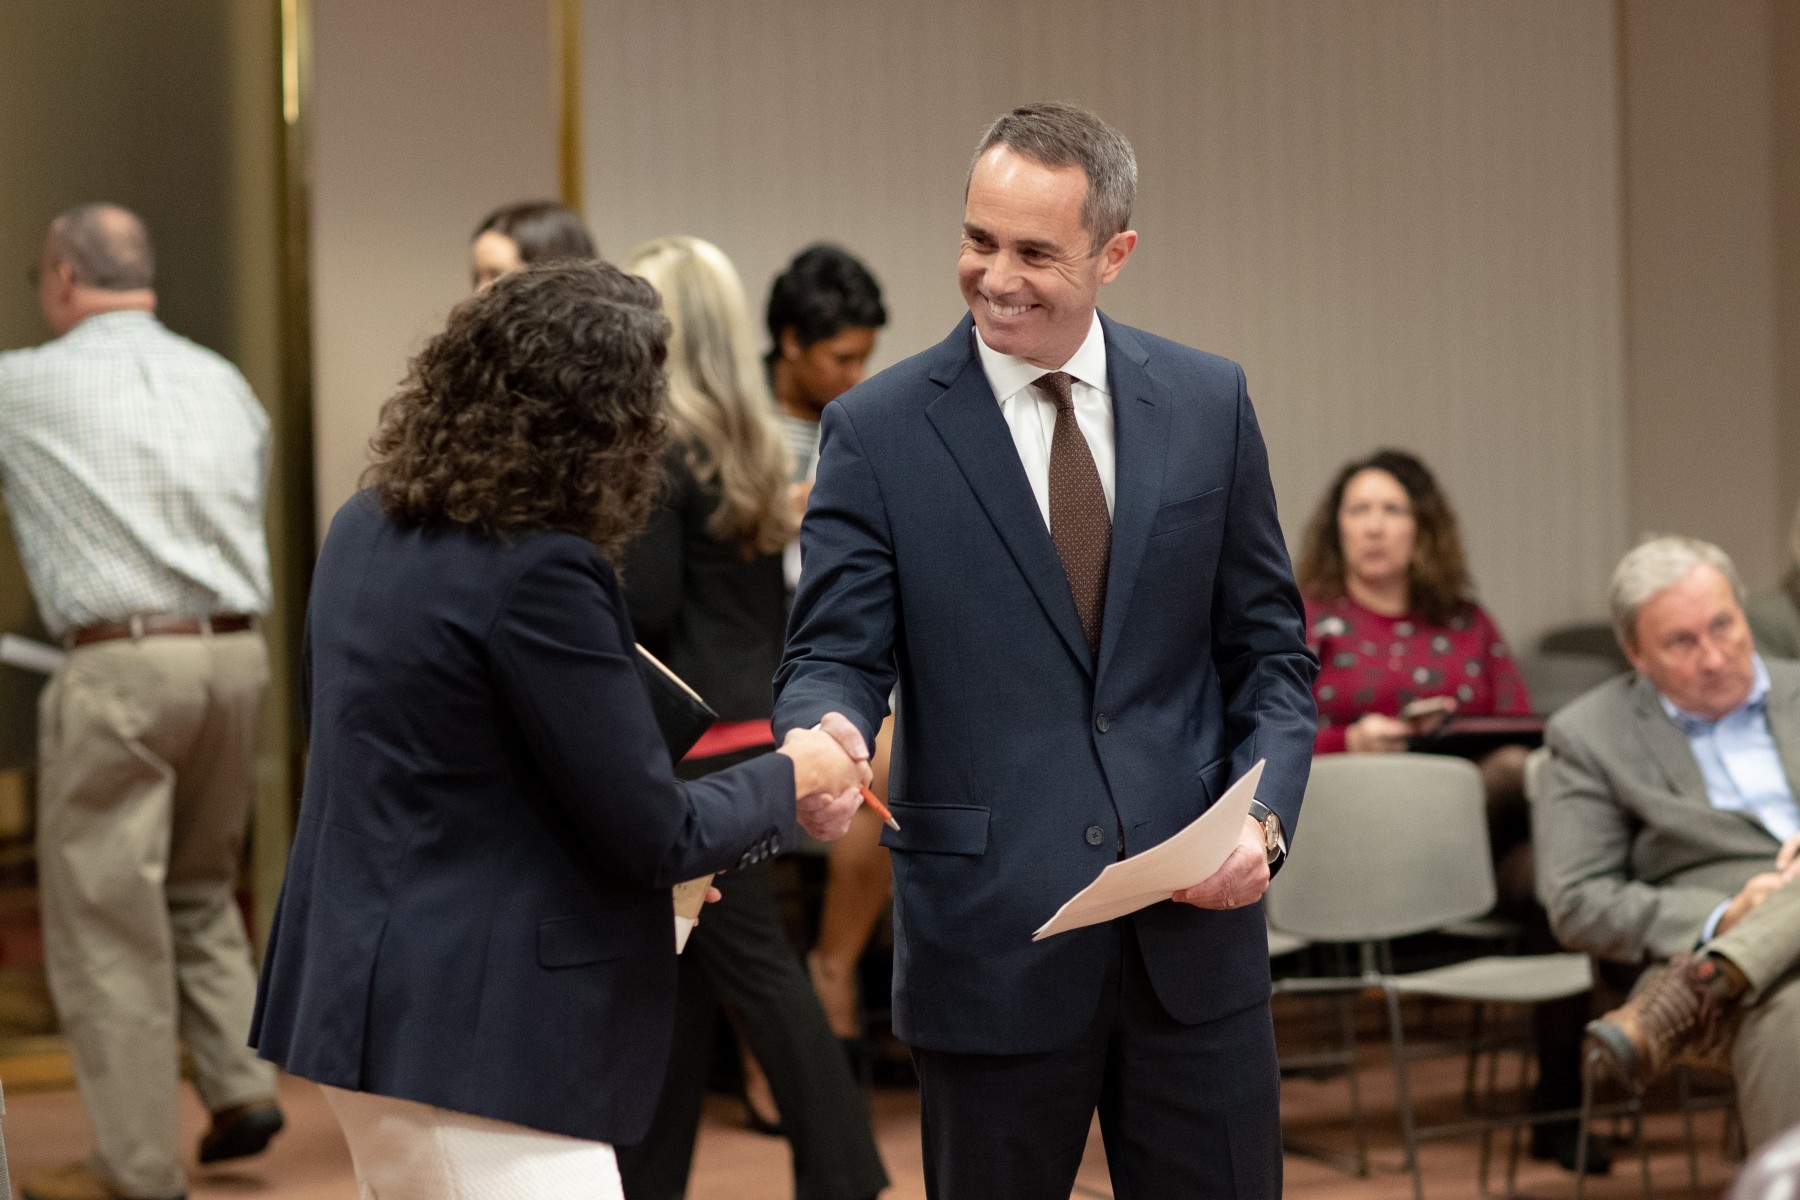 November 18, 2019: State Government Committee Meeting